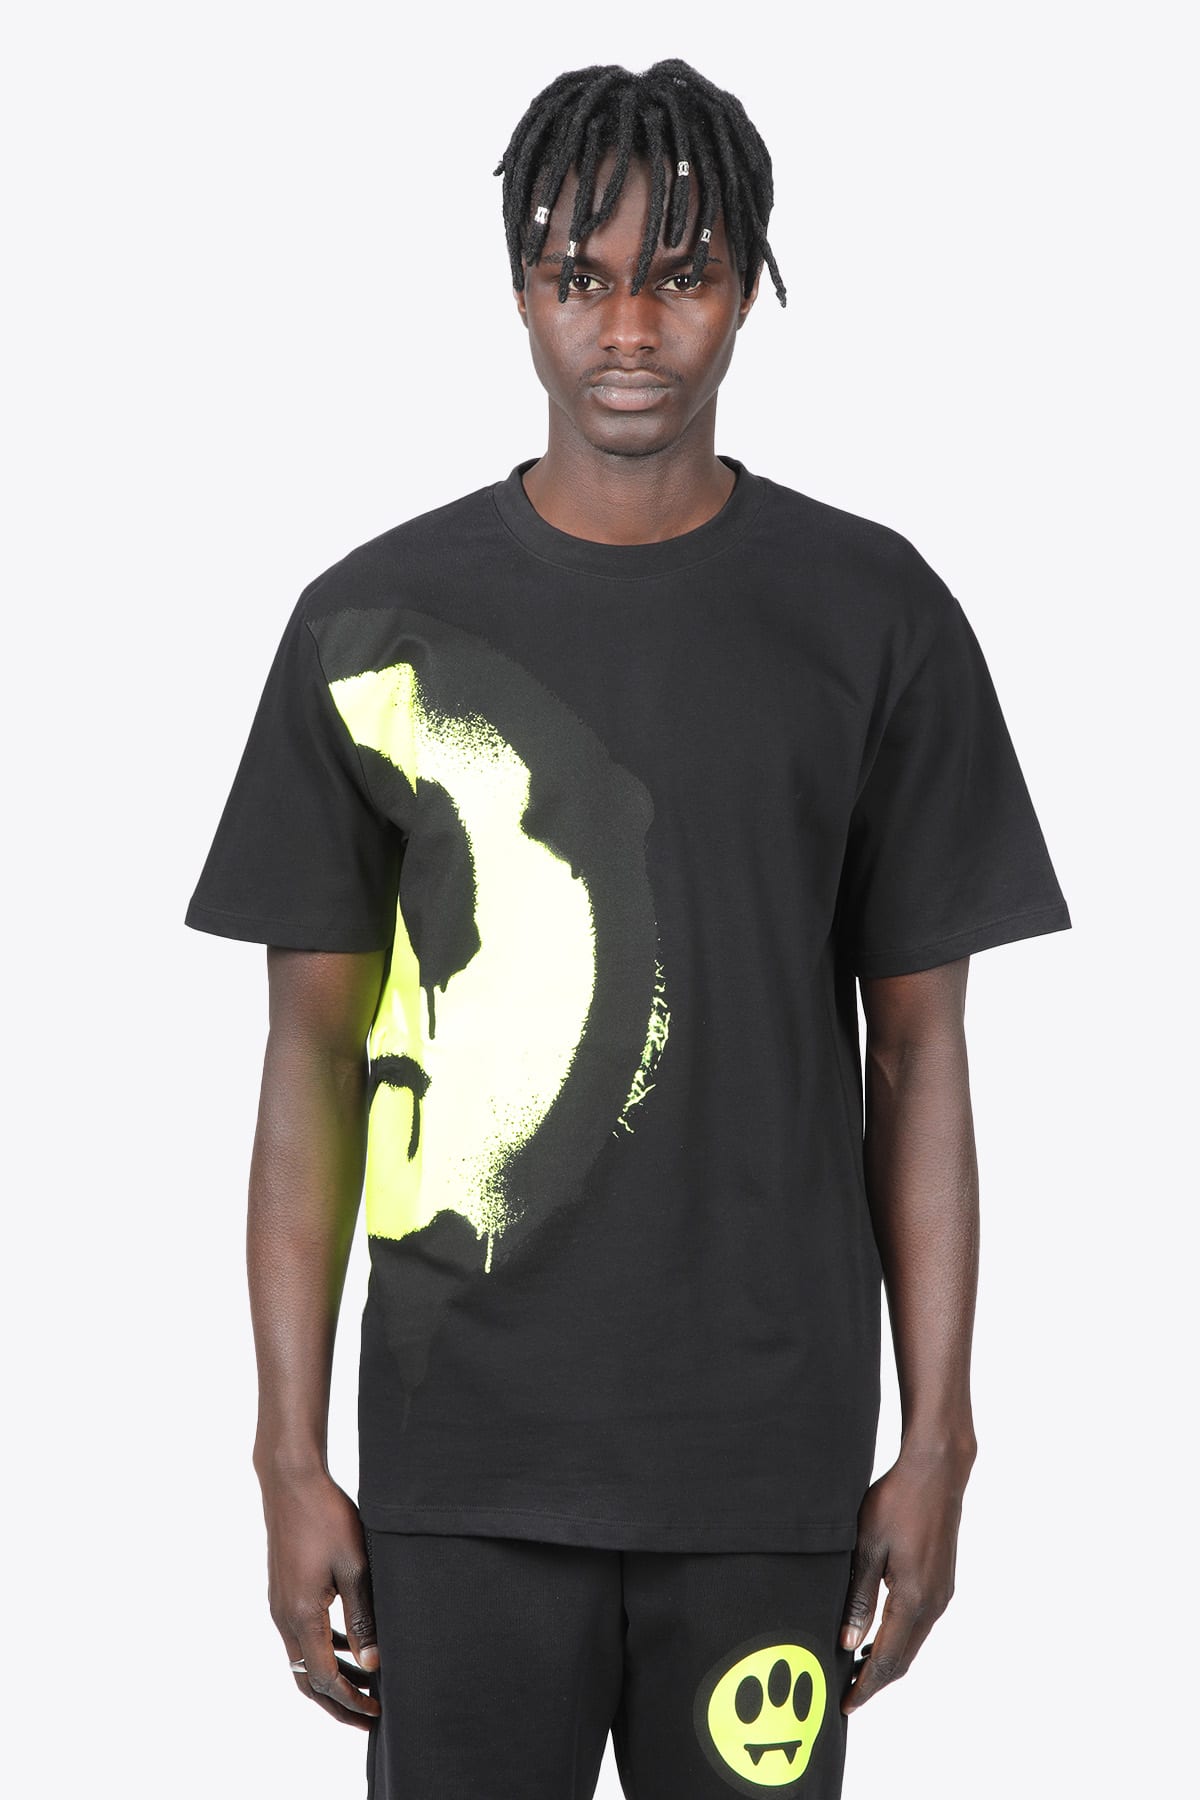 Barrow T-shirt Jersey Unisex Black cotton tshirt with side smile print